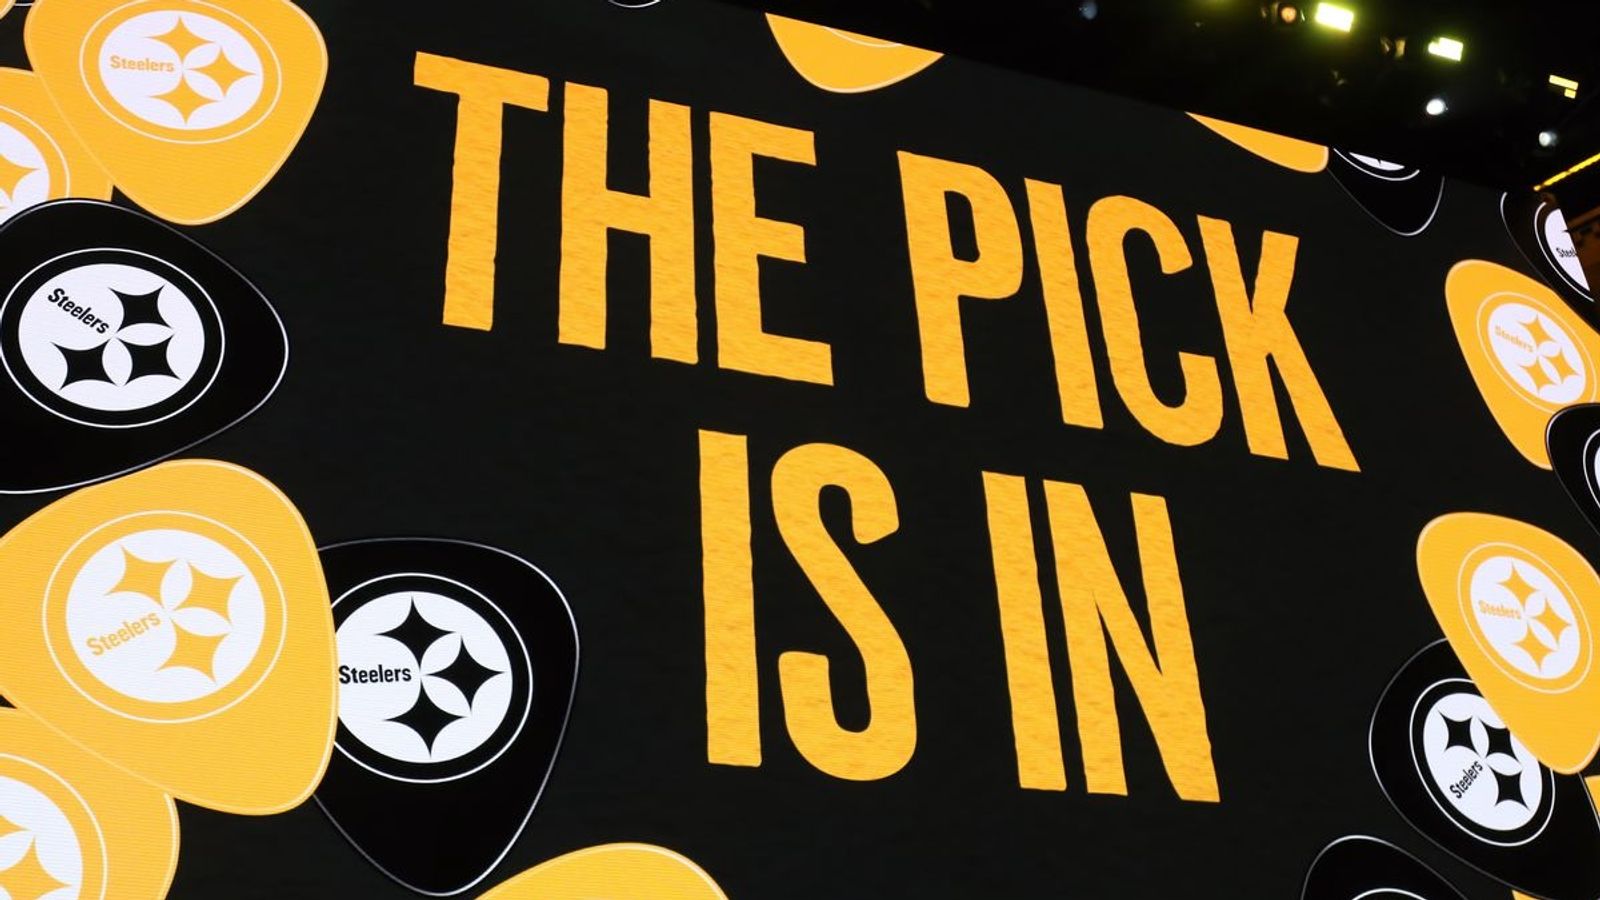 With offseason bound to heat up, Steelers' draft slots are officially set